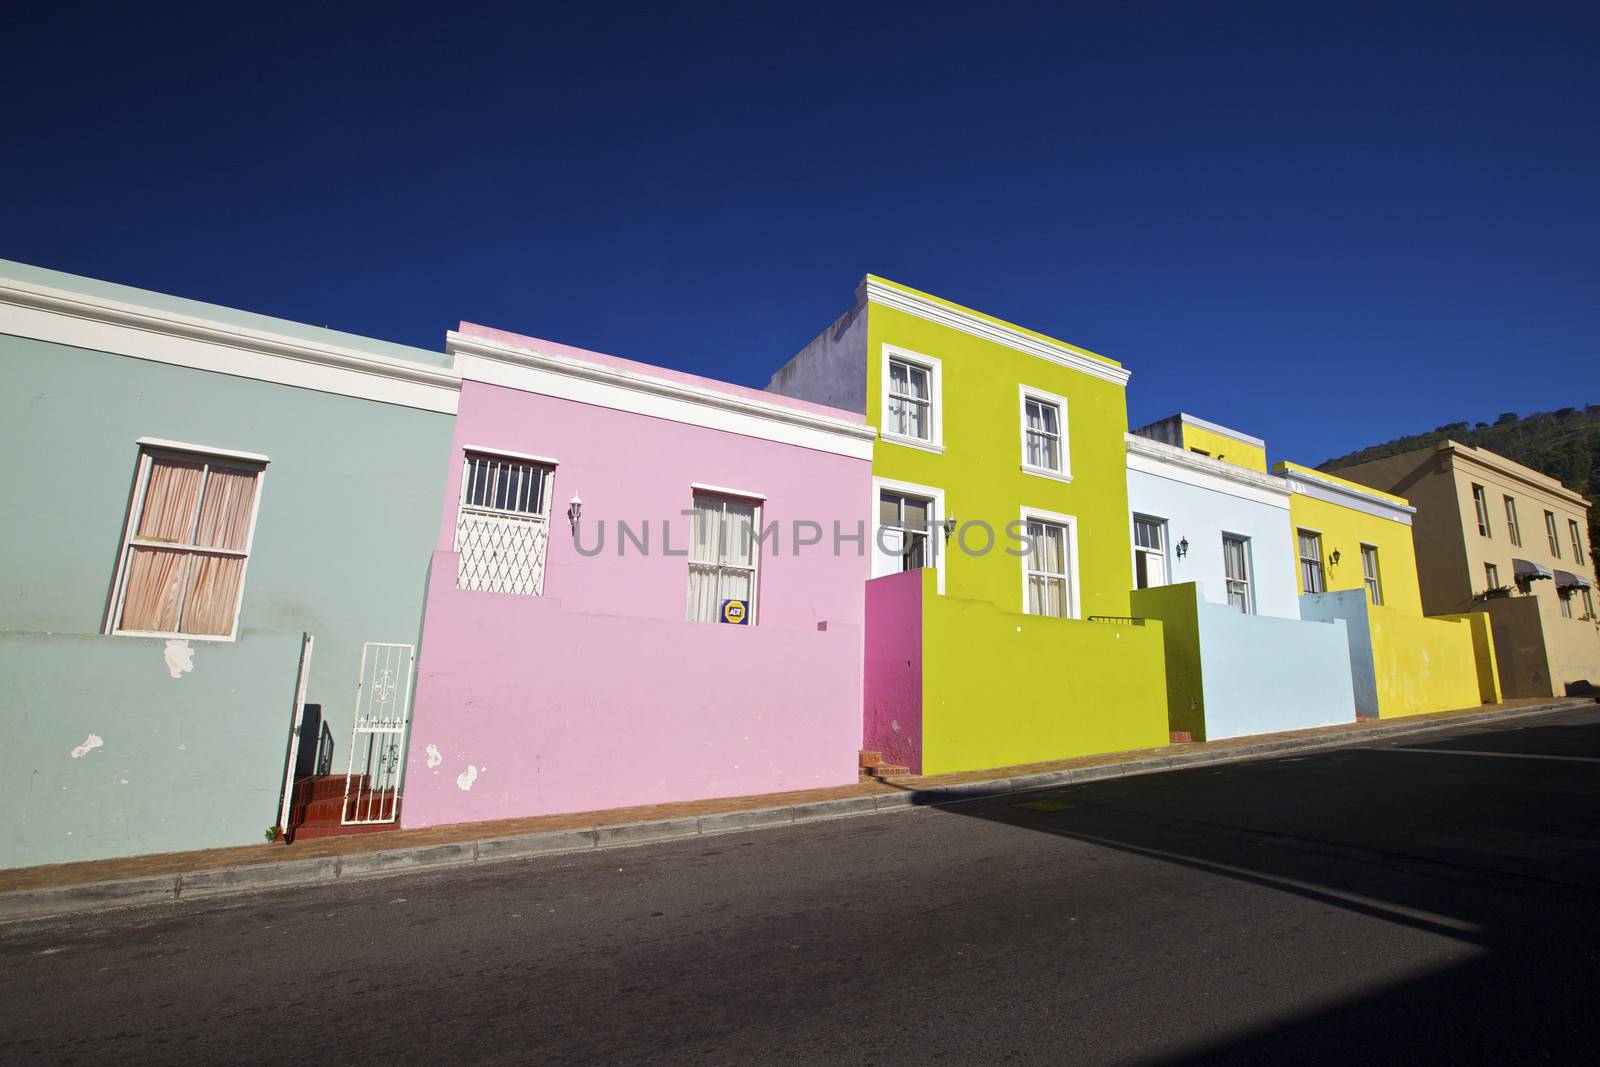 Bo Kaap District Cape Town Western Cape Province South Africa A row of Bright Painted Houses With the Moutains in the Background Very Famous Area in the City Centre and Popular With the Tourist's for Photograph's